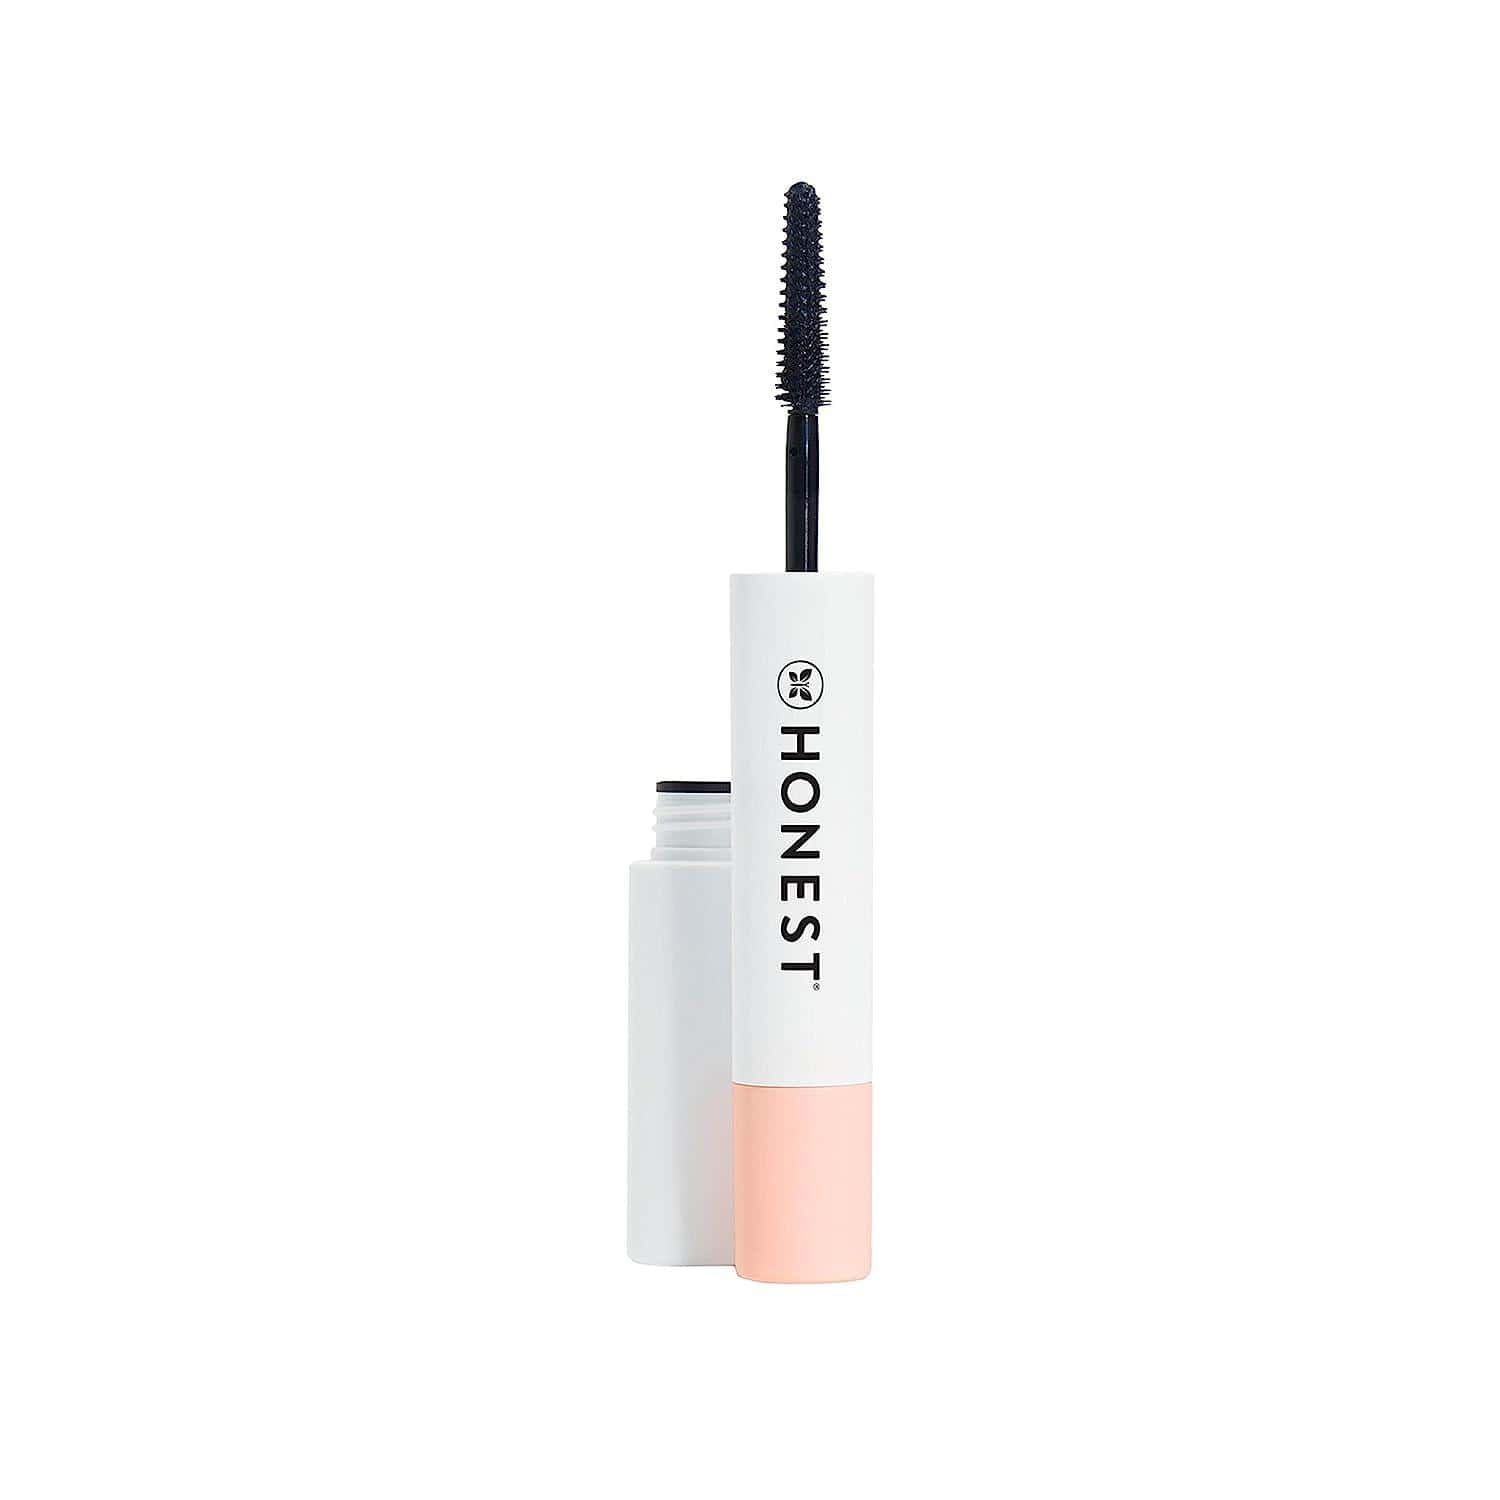 Honest Beauty's award-winning lengthening mascara, honored with the 2021 Readers' Choice Award, seamlessly combines moisturizing benefits. Its remarkable longevity, even after a few margaritas, solidifies it as a standout choice in my routine.